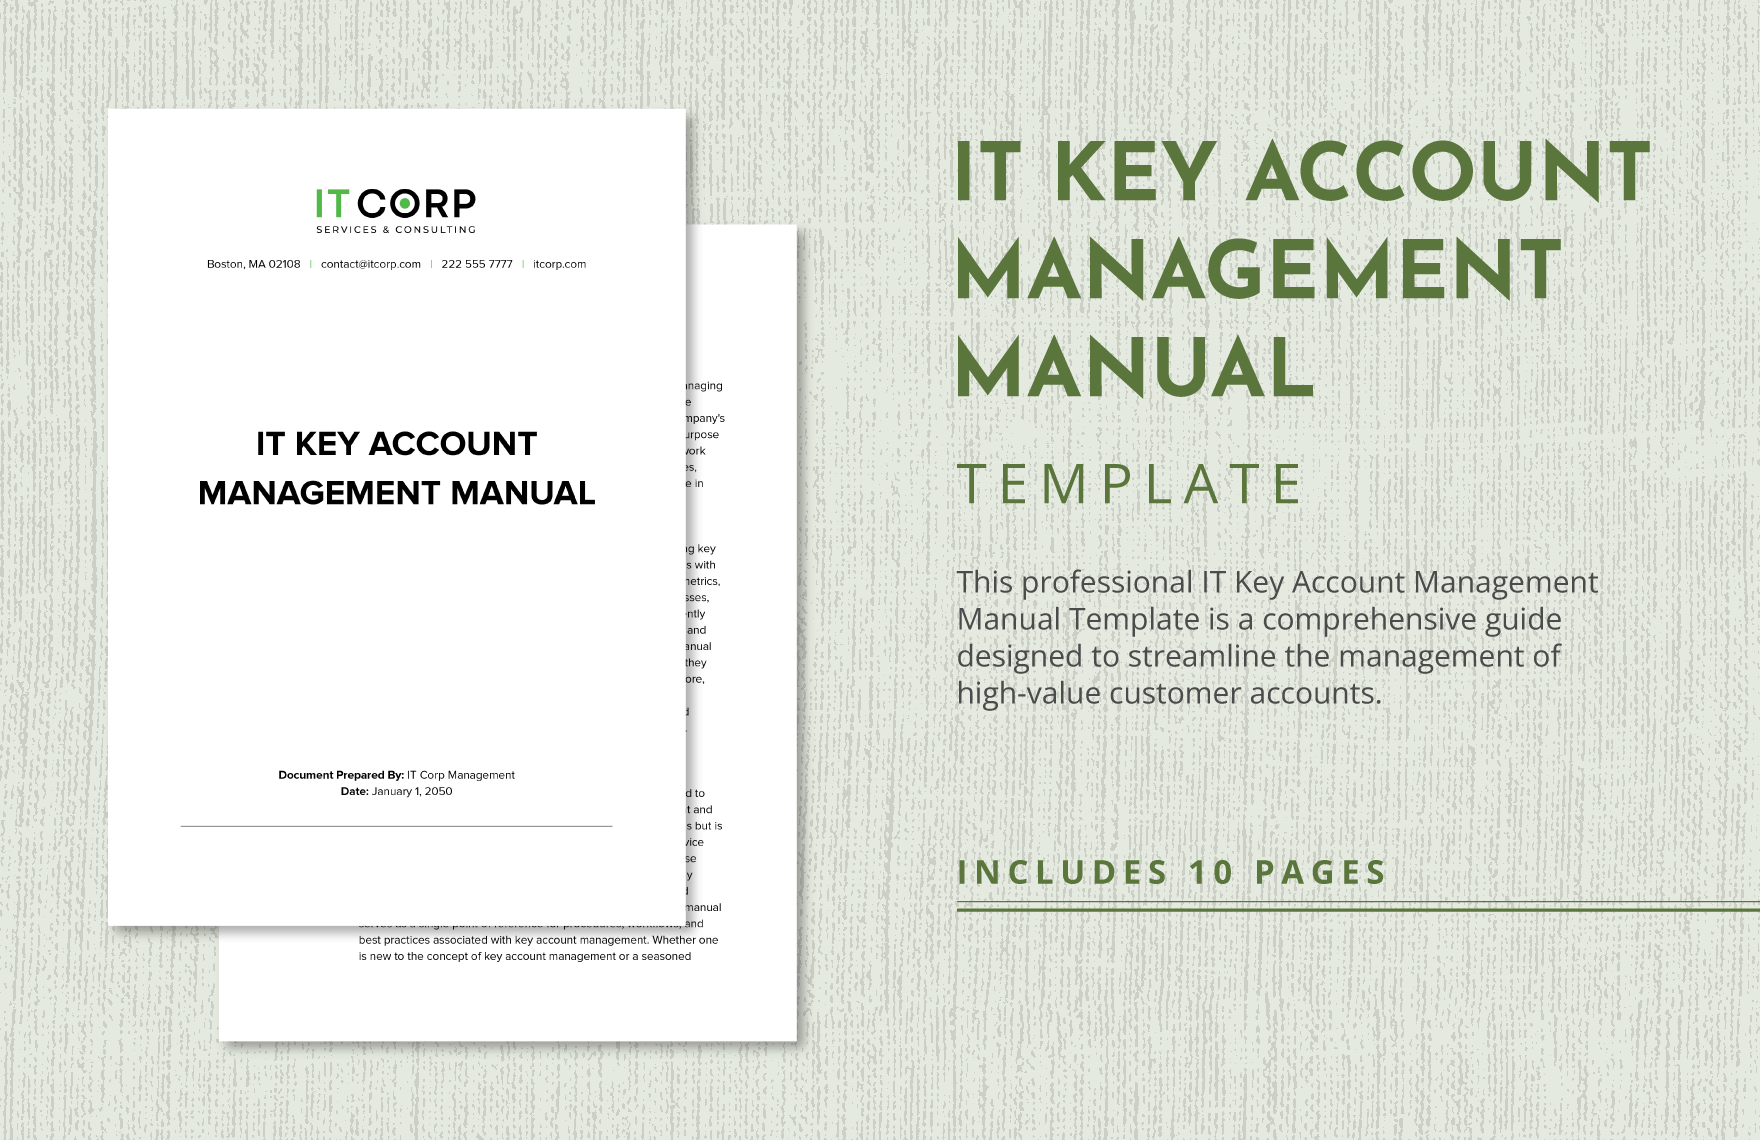 IT Key Account Management Manual Template in Word, Google Docs, PDF